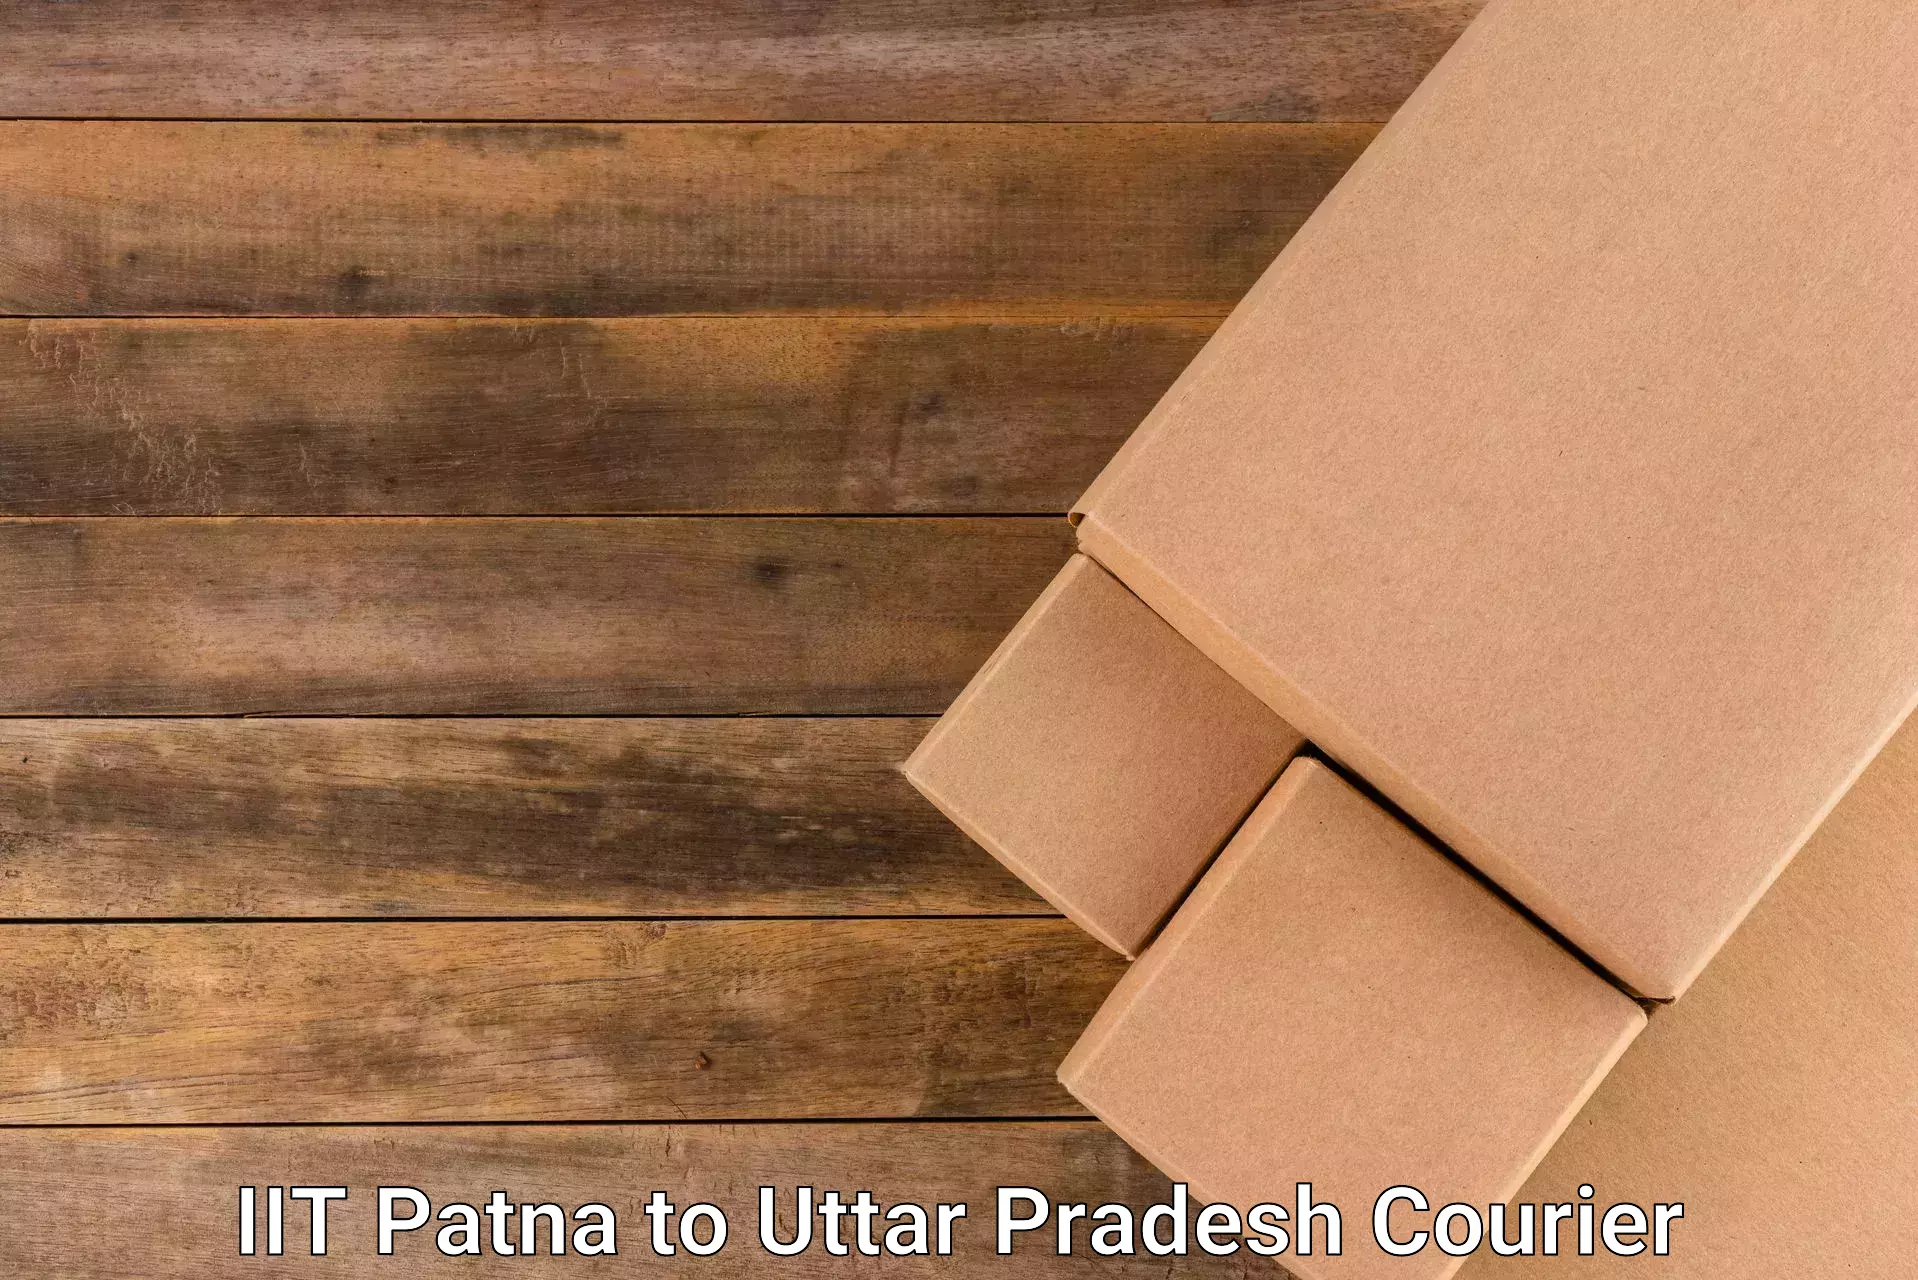 Local delivery service IIT Patna to Dadri